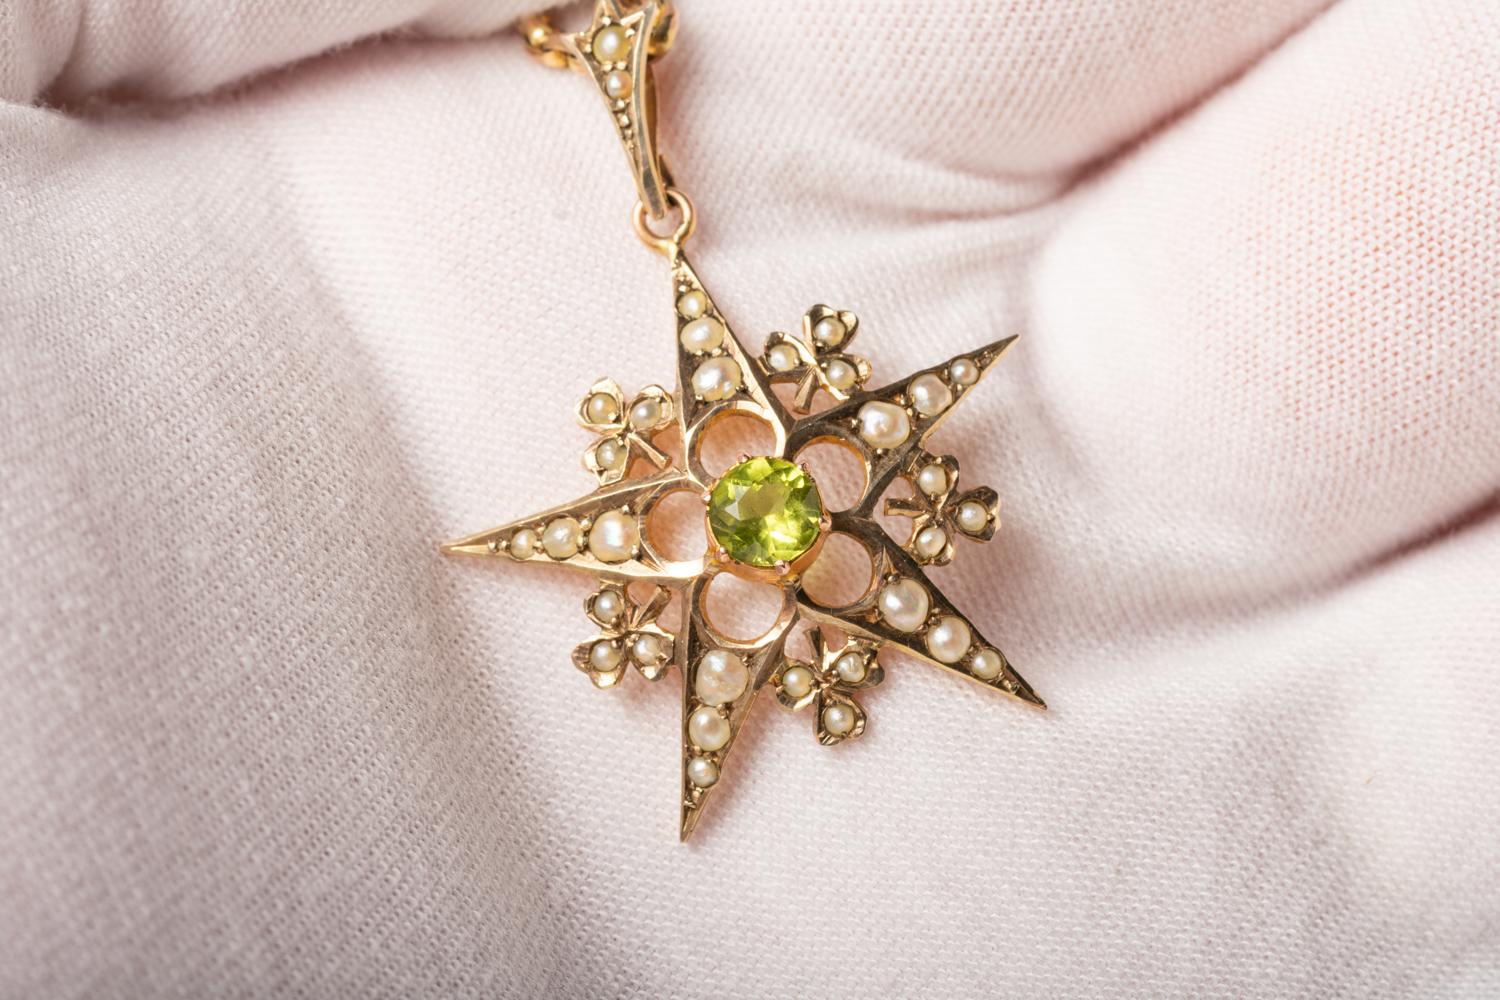 Antique 9ct Gold Peridot And Pearl Pendant With A Chain 1